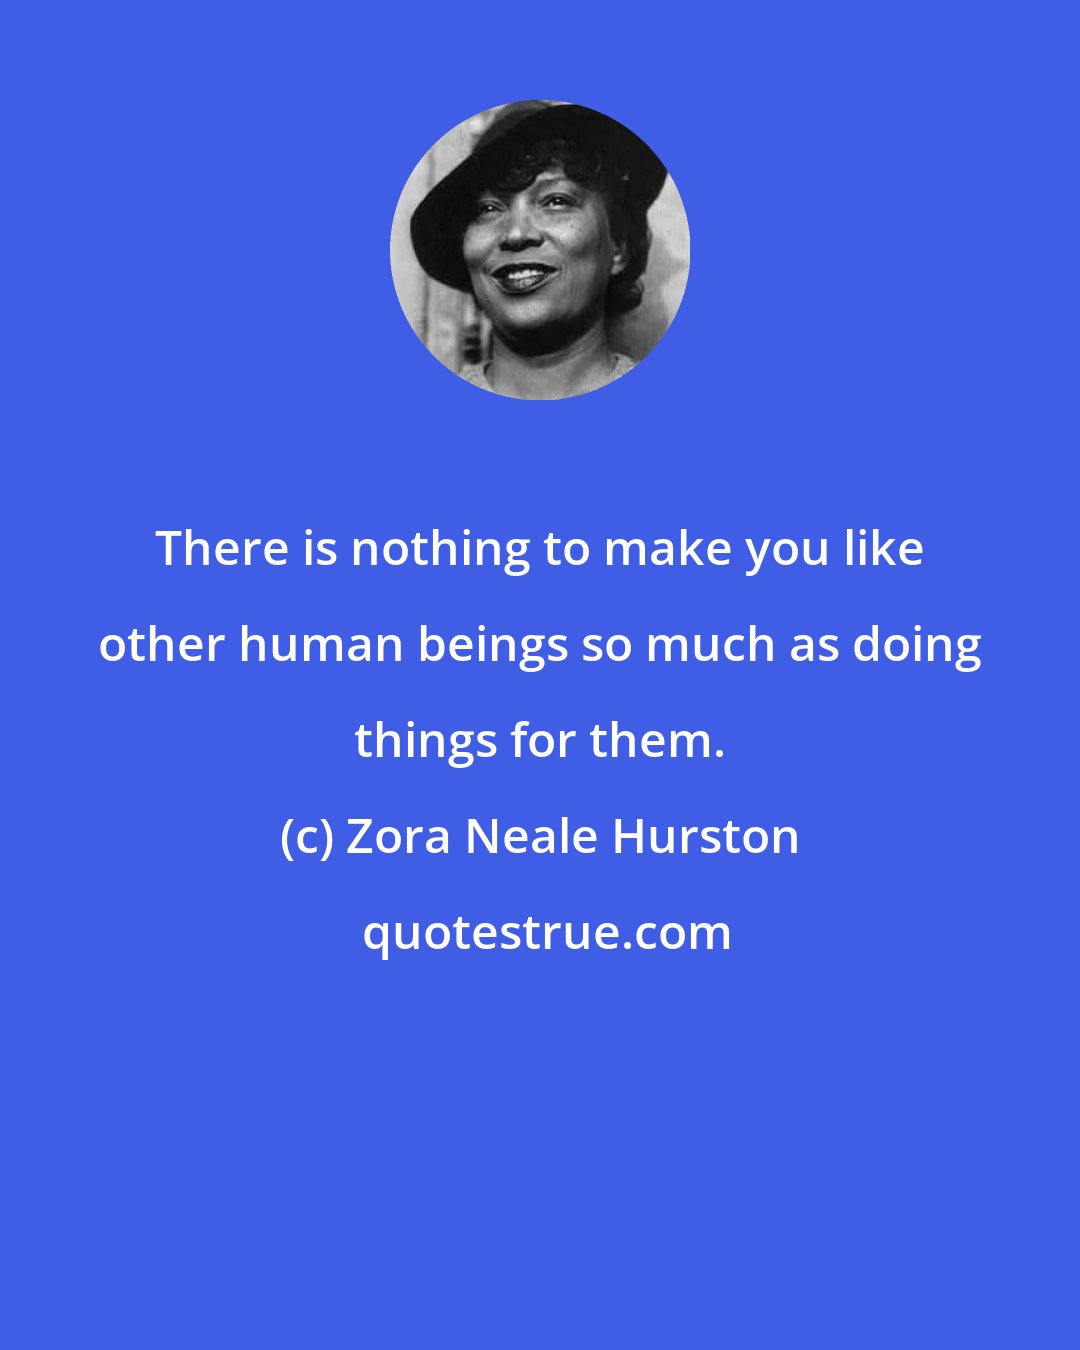 Zora Neale Hurston: There is nothing to make you like other human beings so much as doing things for them.